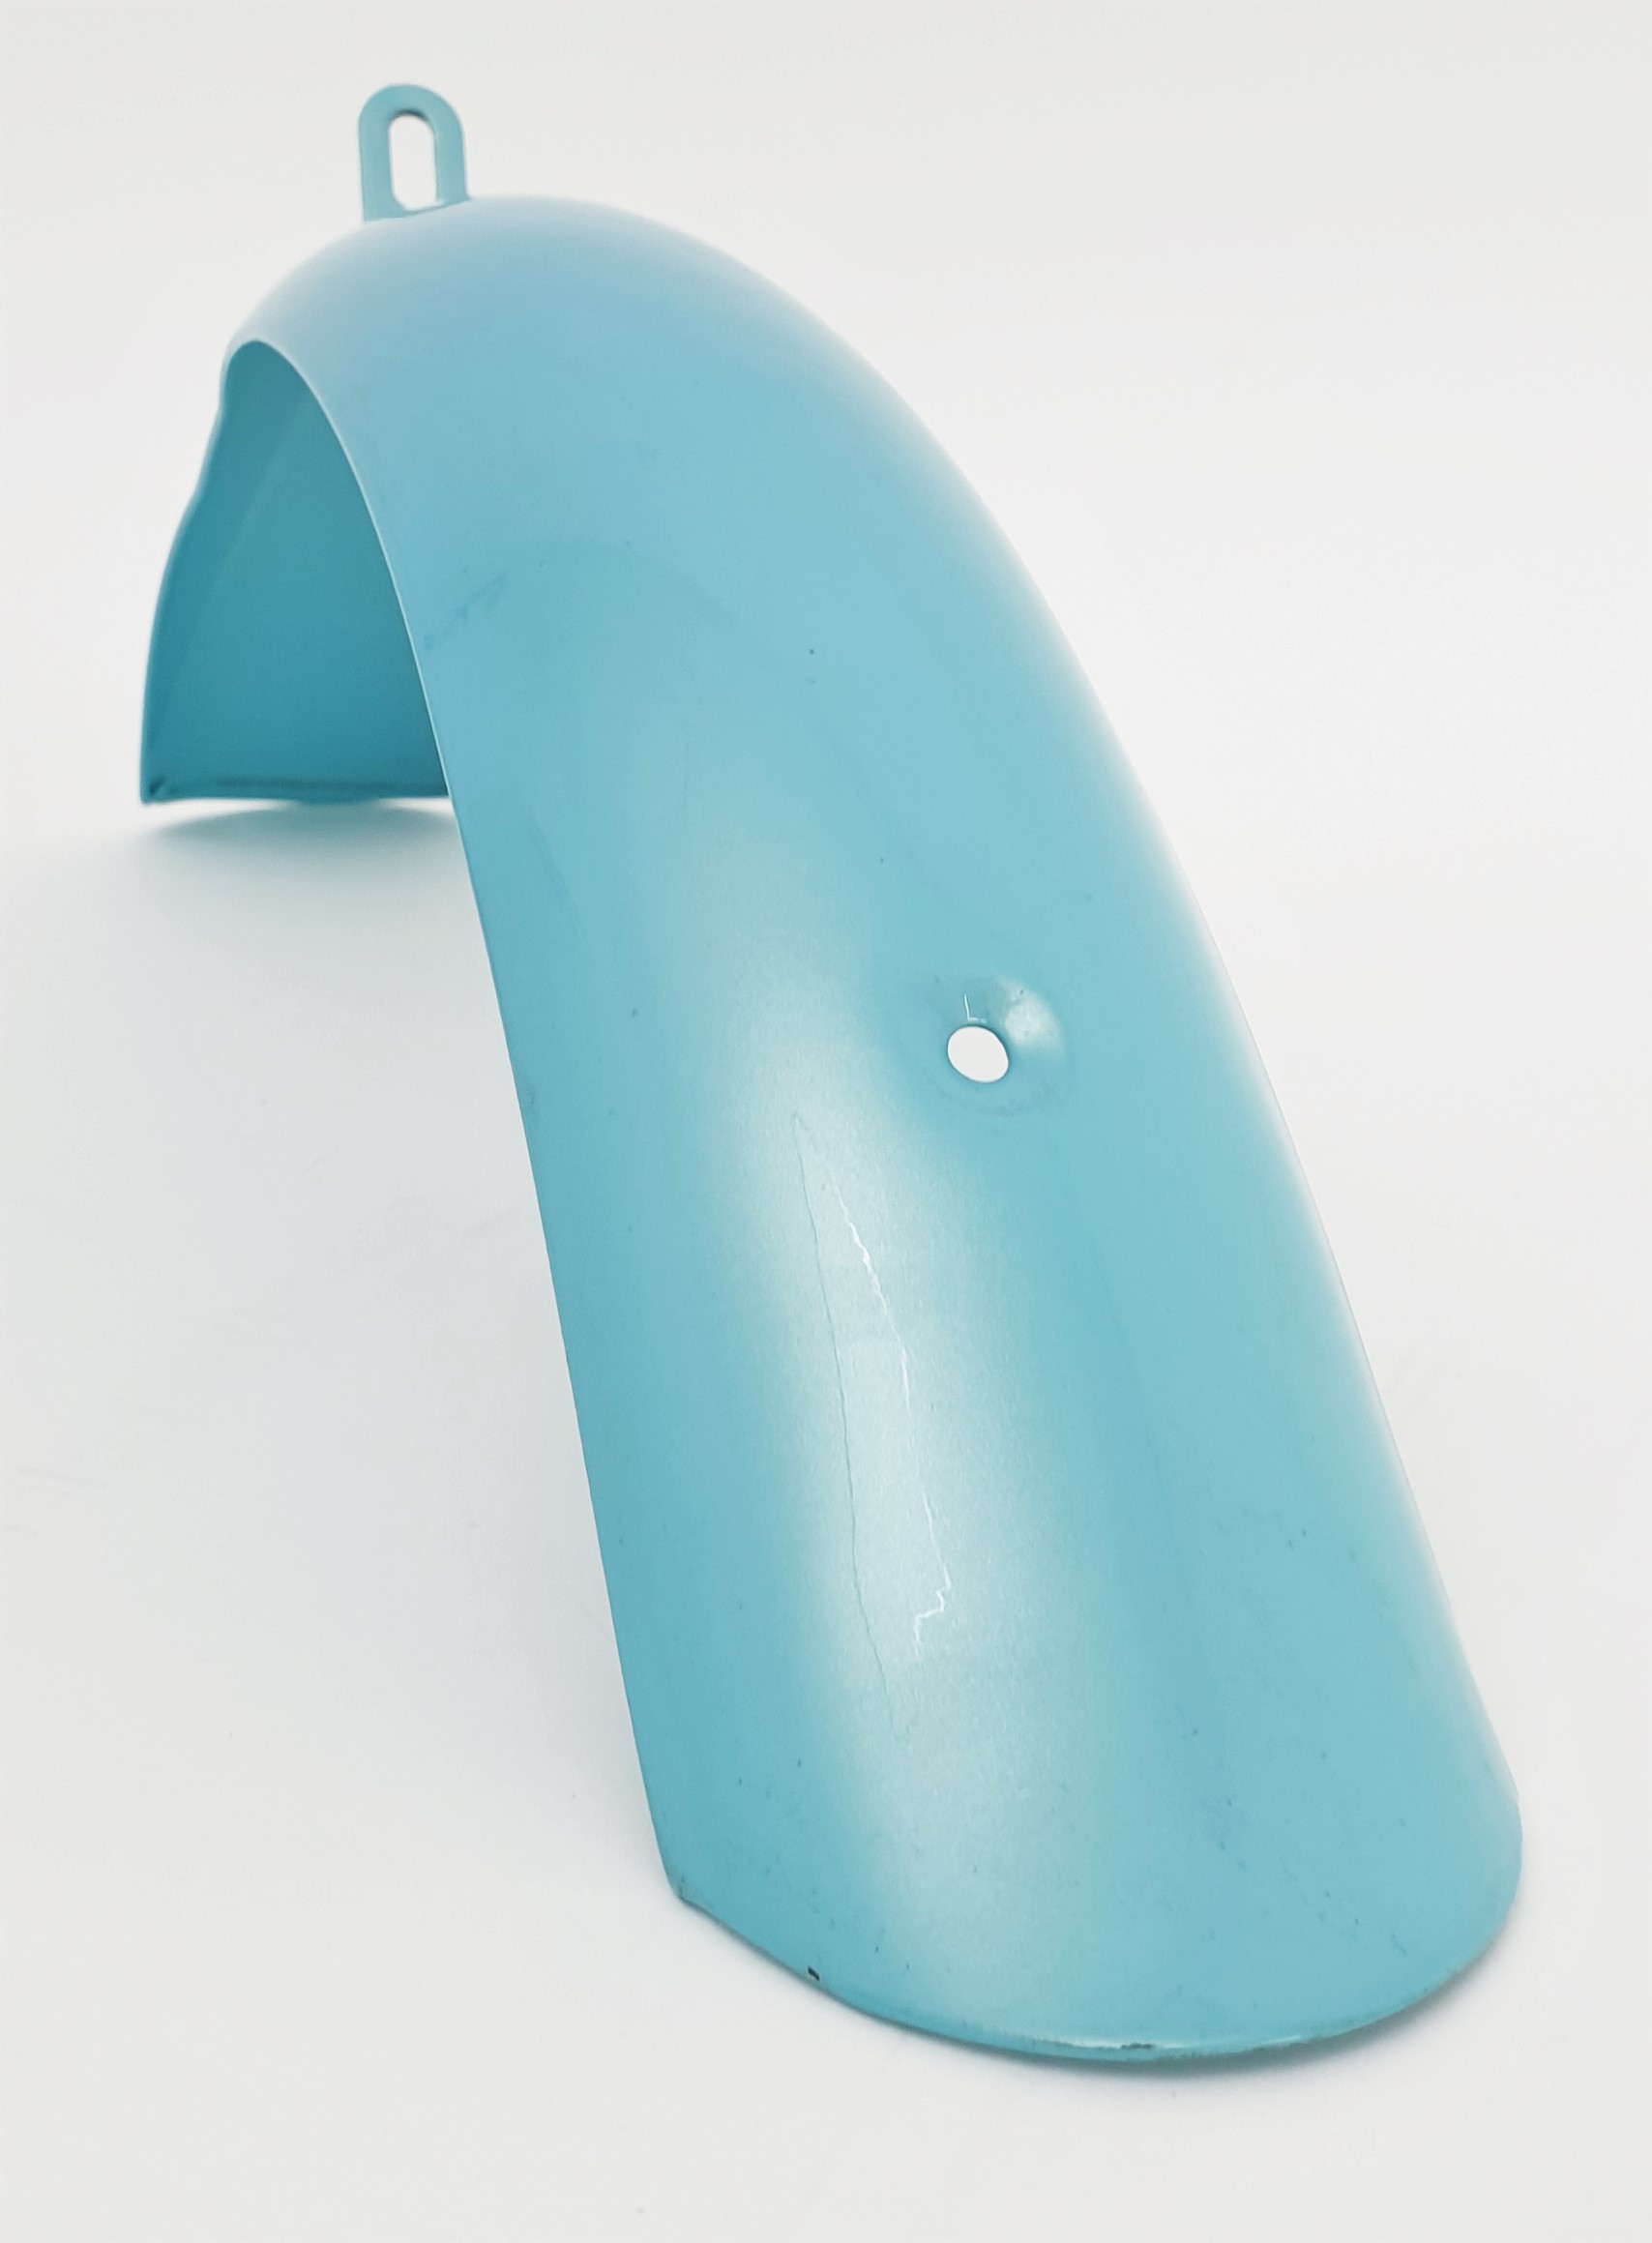 ELECTRA Hawaii original Front Fender 20" turquoise/blue